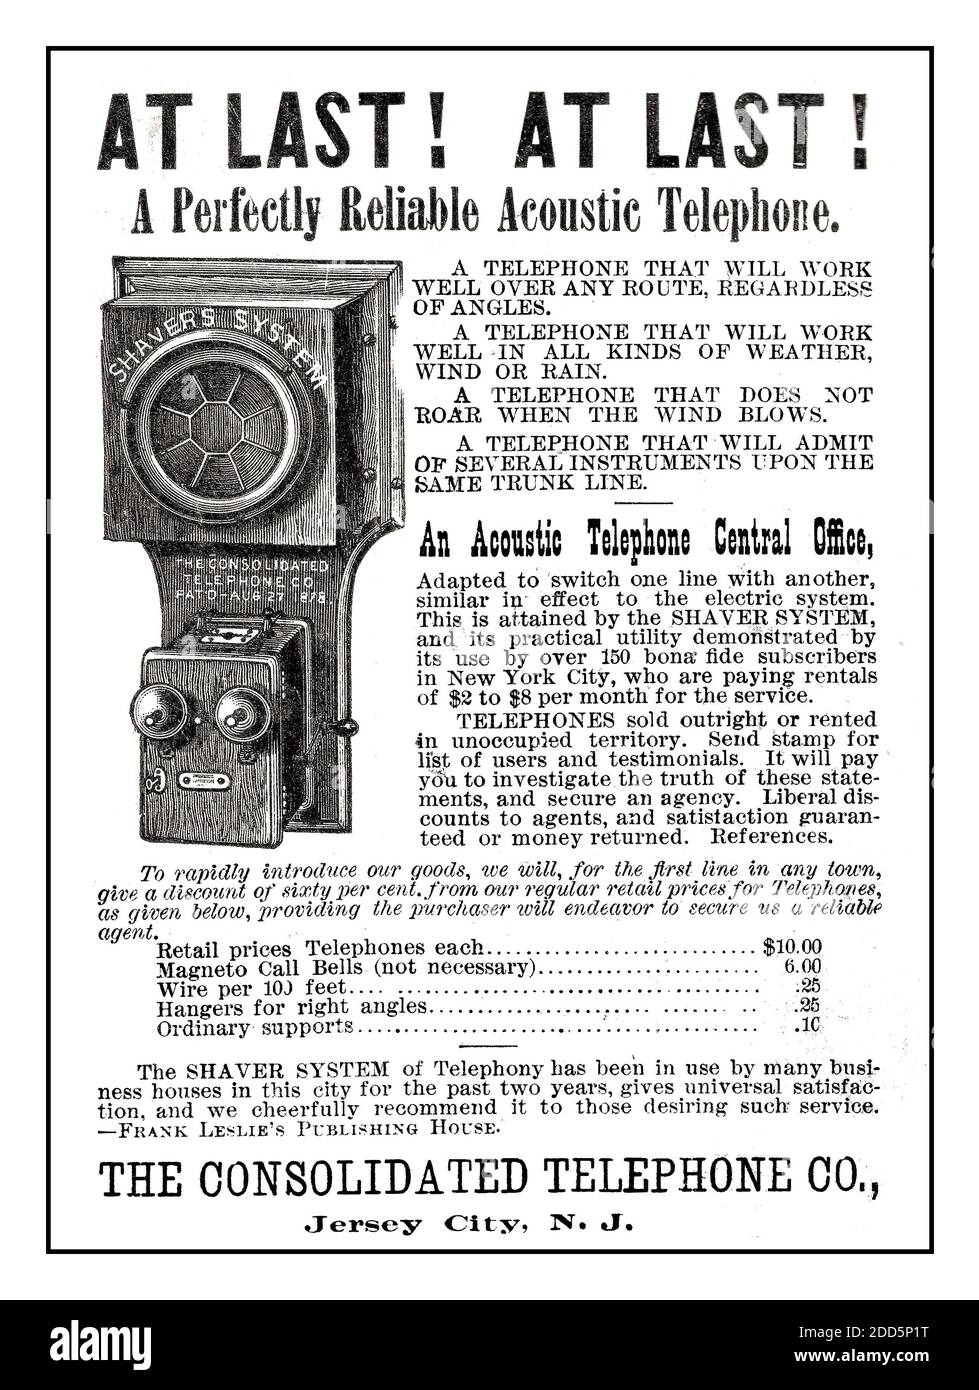 Historic early Acoustic Telephone 1800's press advertisement Consolidated Telephone Co. ad 1886. AT LAST ! AT LAST ! A perfectly reliable acoustic telephone Stock Photo